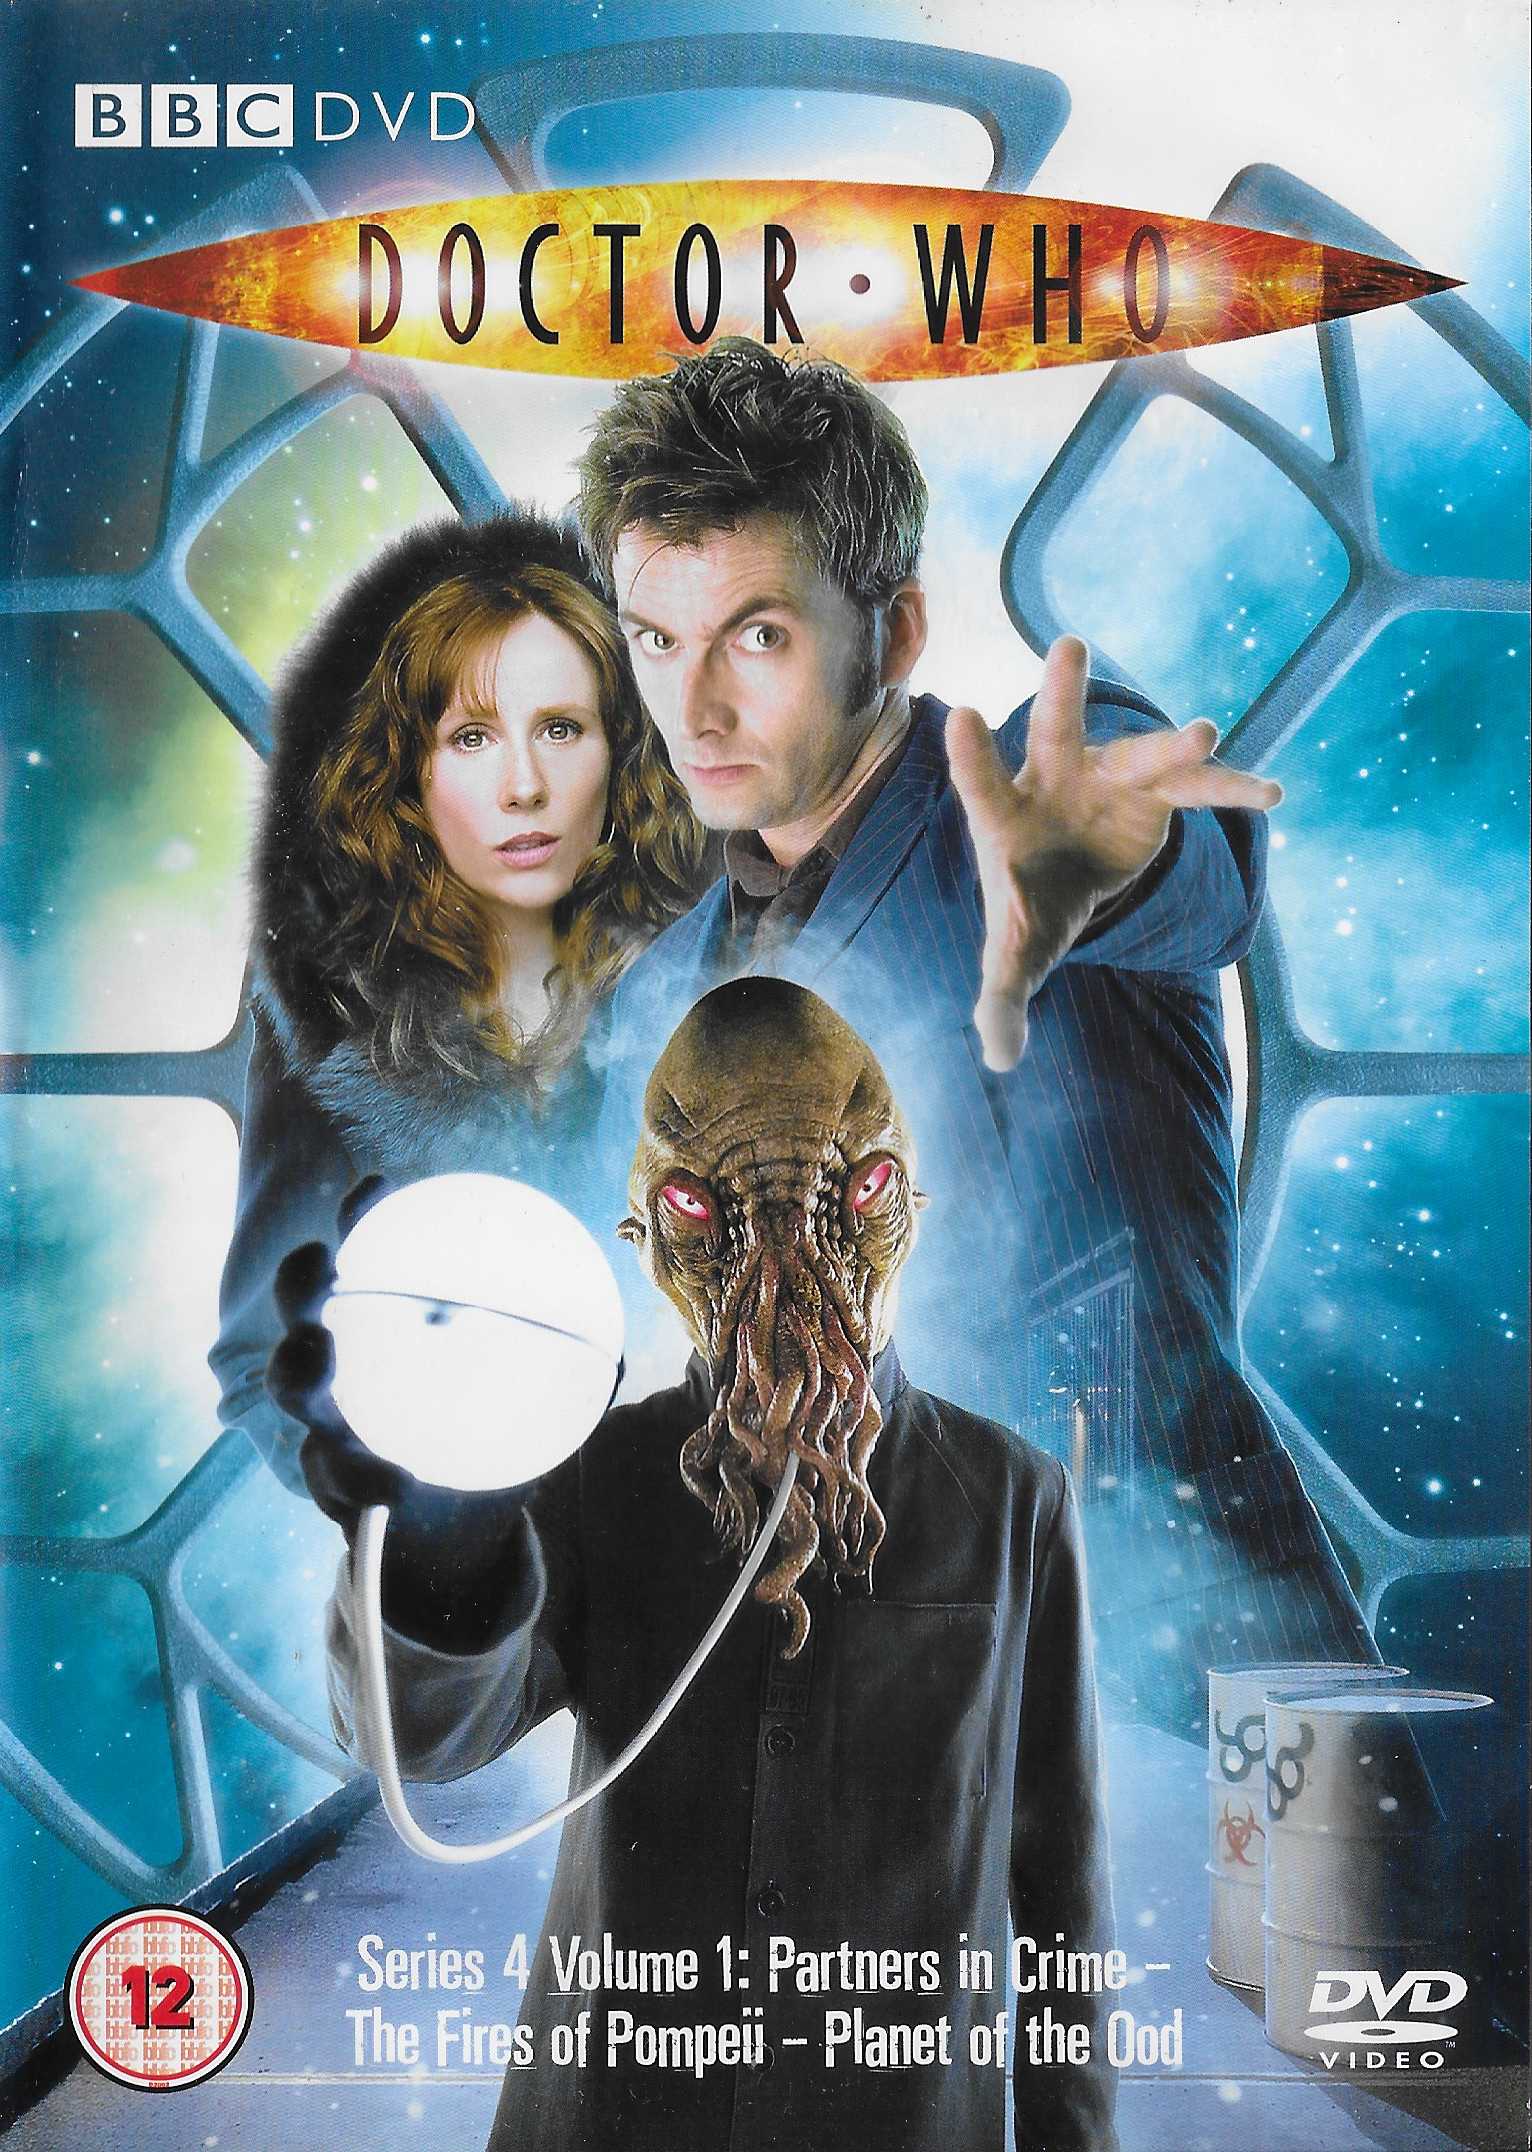 Picture of BBCDVD 2605 Doctor Who - Series 4, volume 1 by artist Russell T Davies / James Moran / Keith Temple from the BBC records and Tapes library